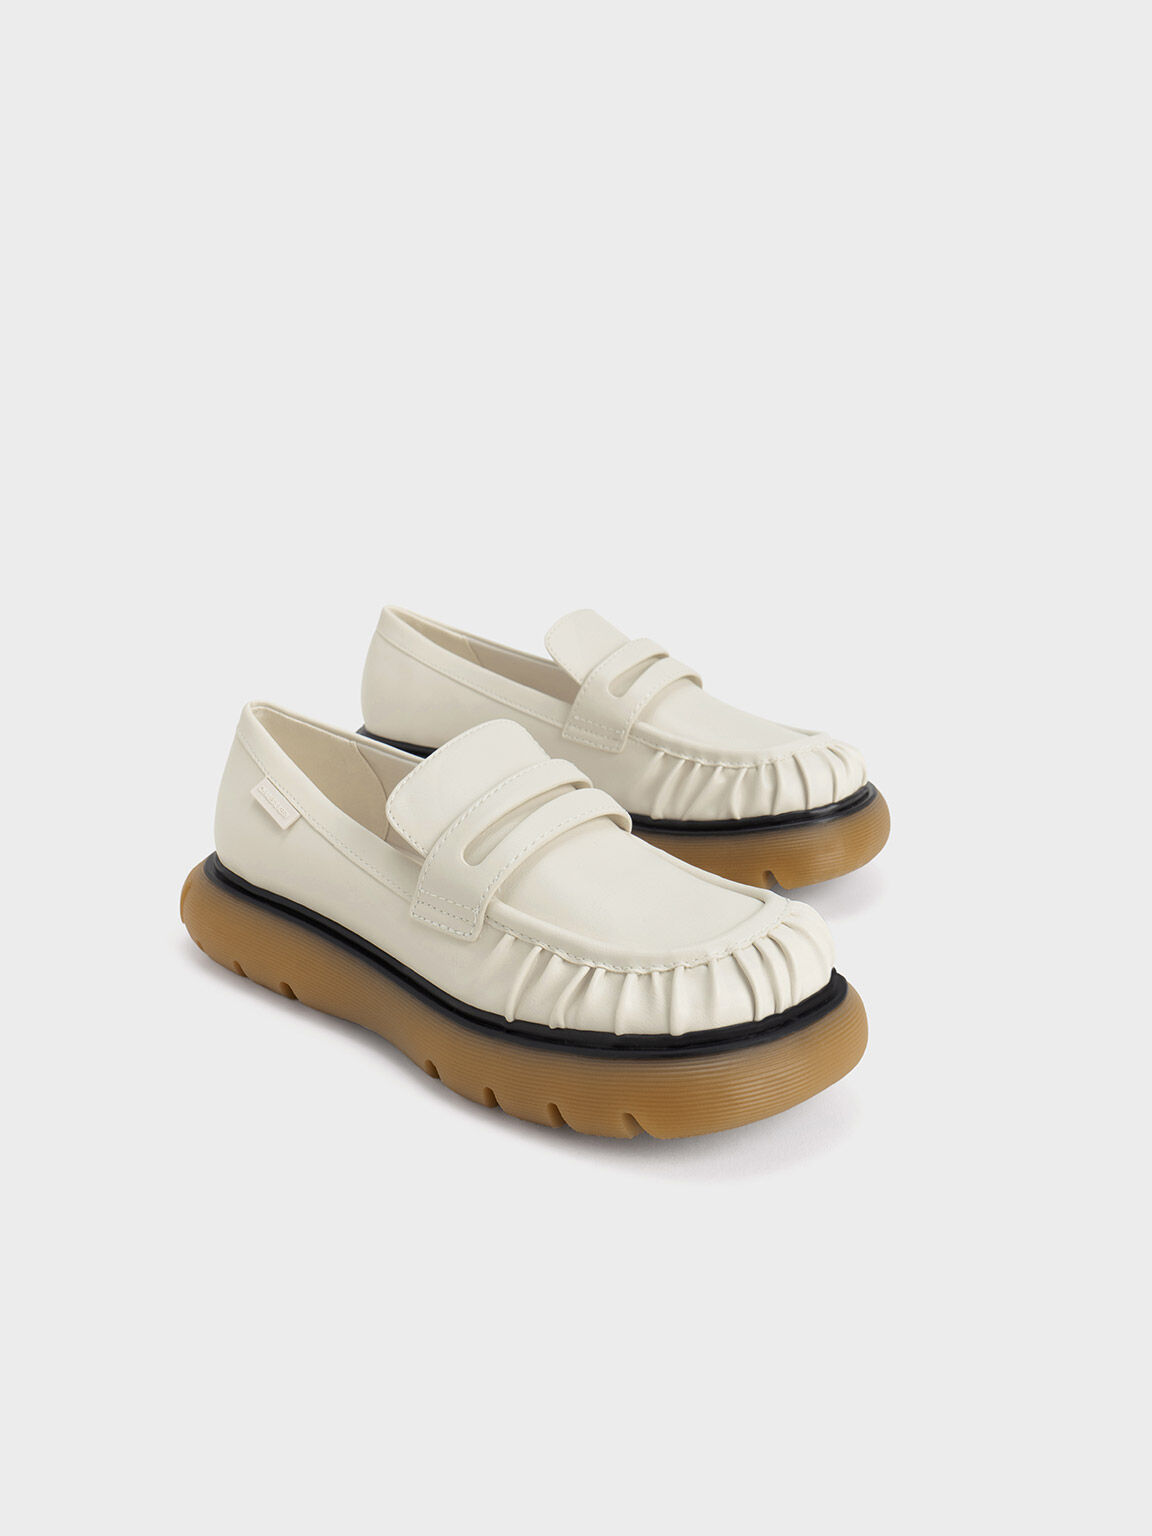 Ruched Ridged-Sole Penny Loafers, White, hi-res